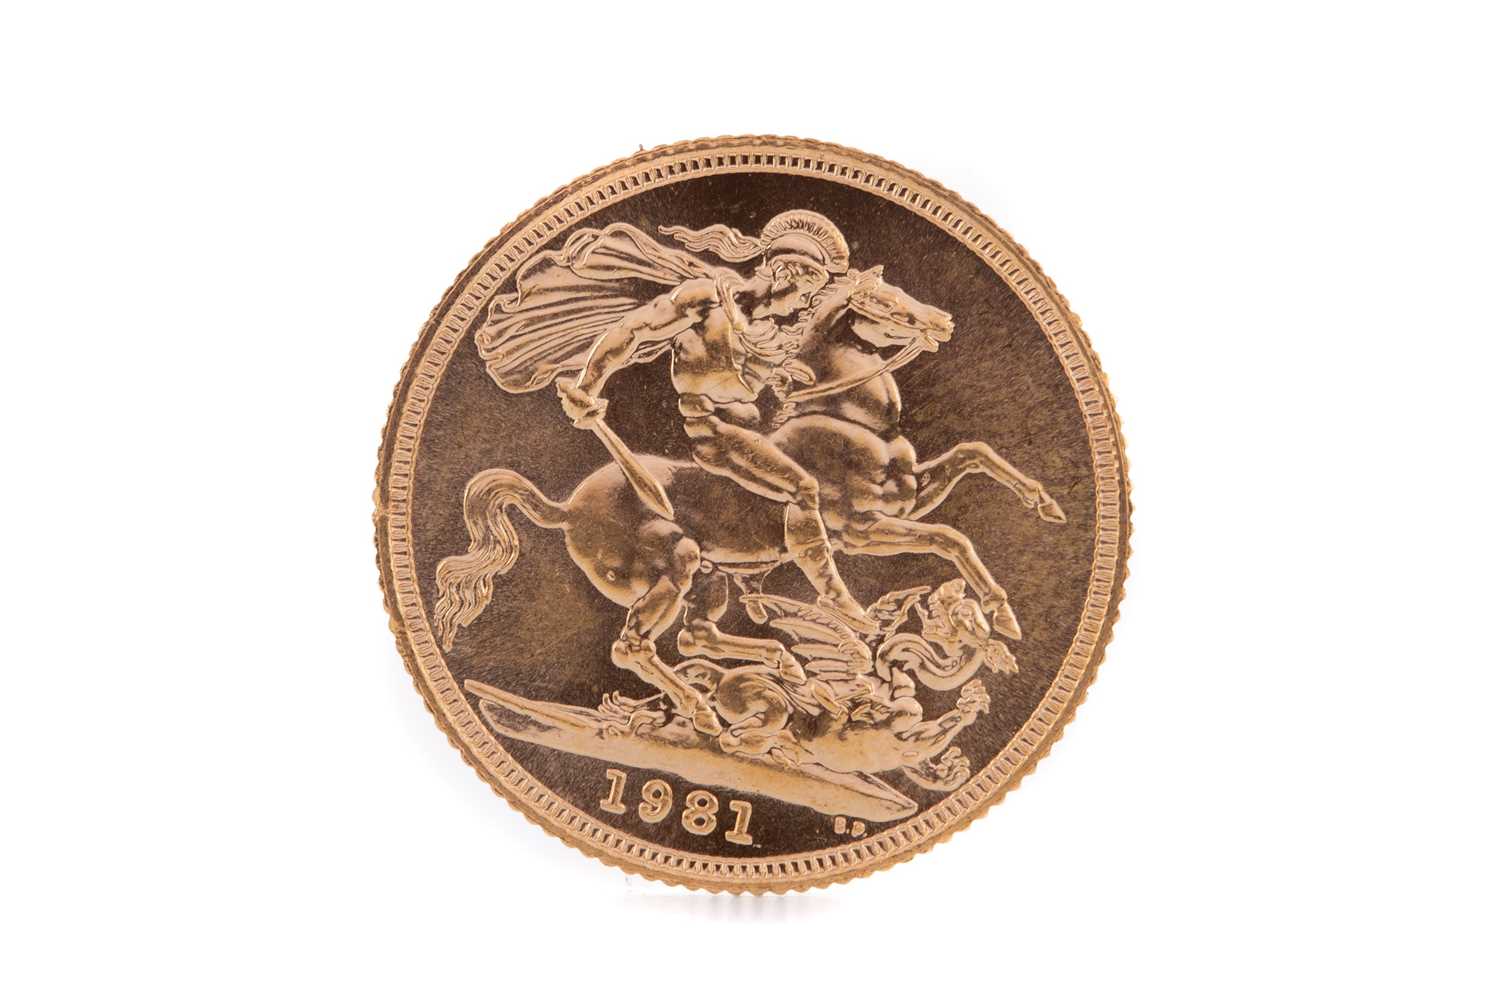 Lot 96 - AN ELIZABETH II GOLD SOVEREIGN DATED 1981